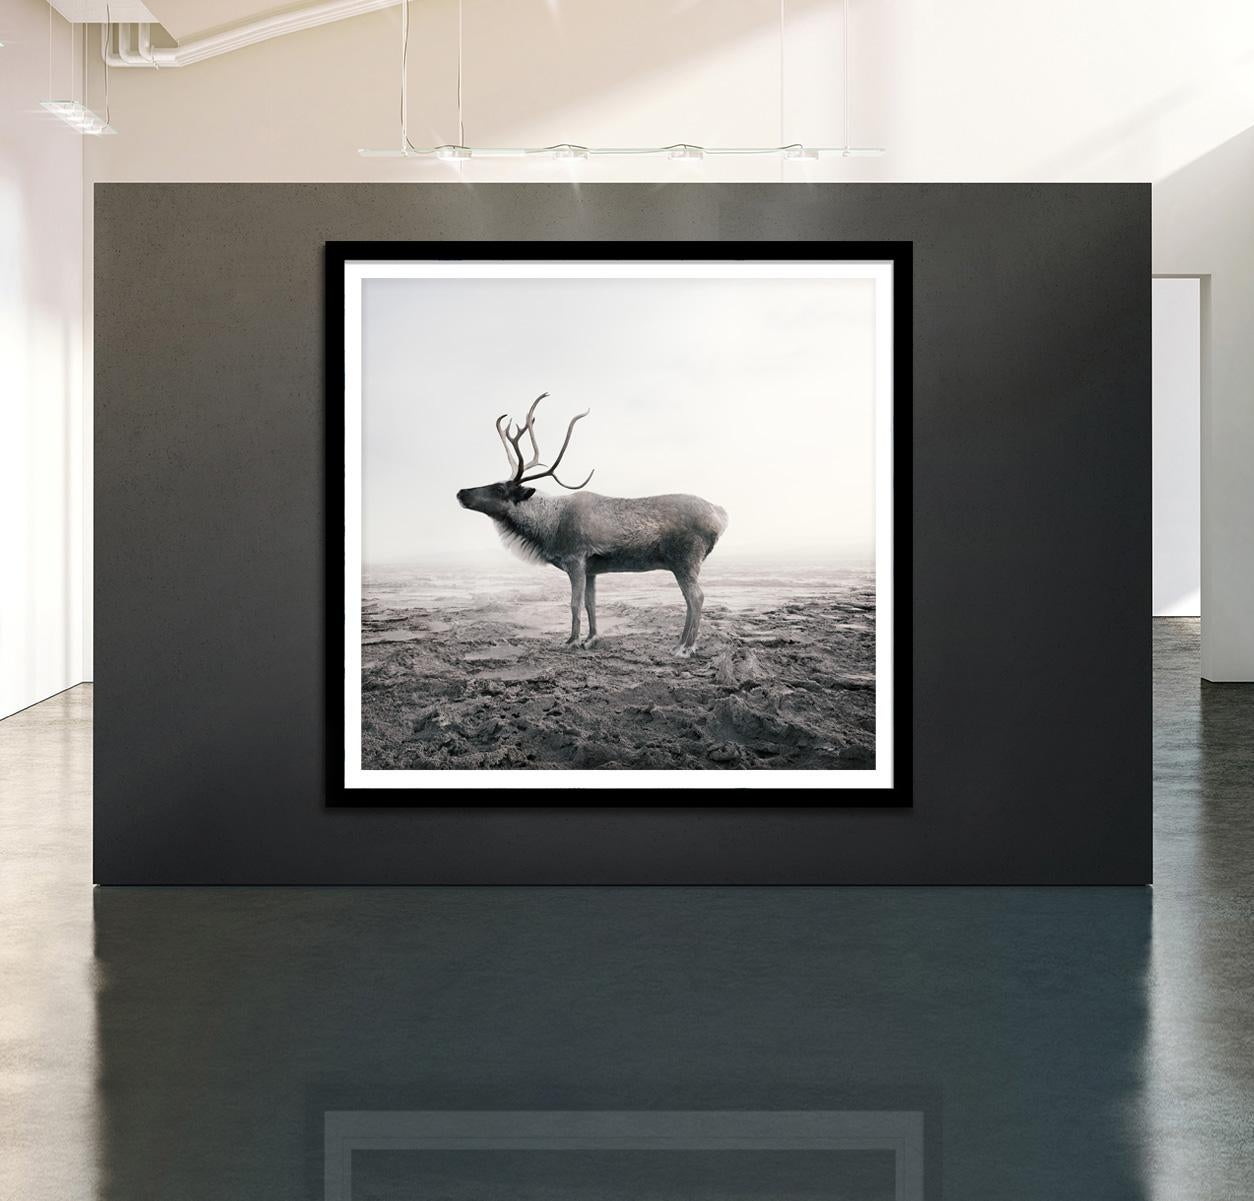 Calm Caribou - Gray Black and White Photograph by Alice Zilberberg